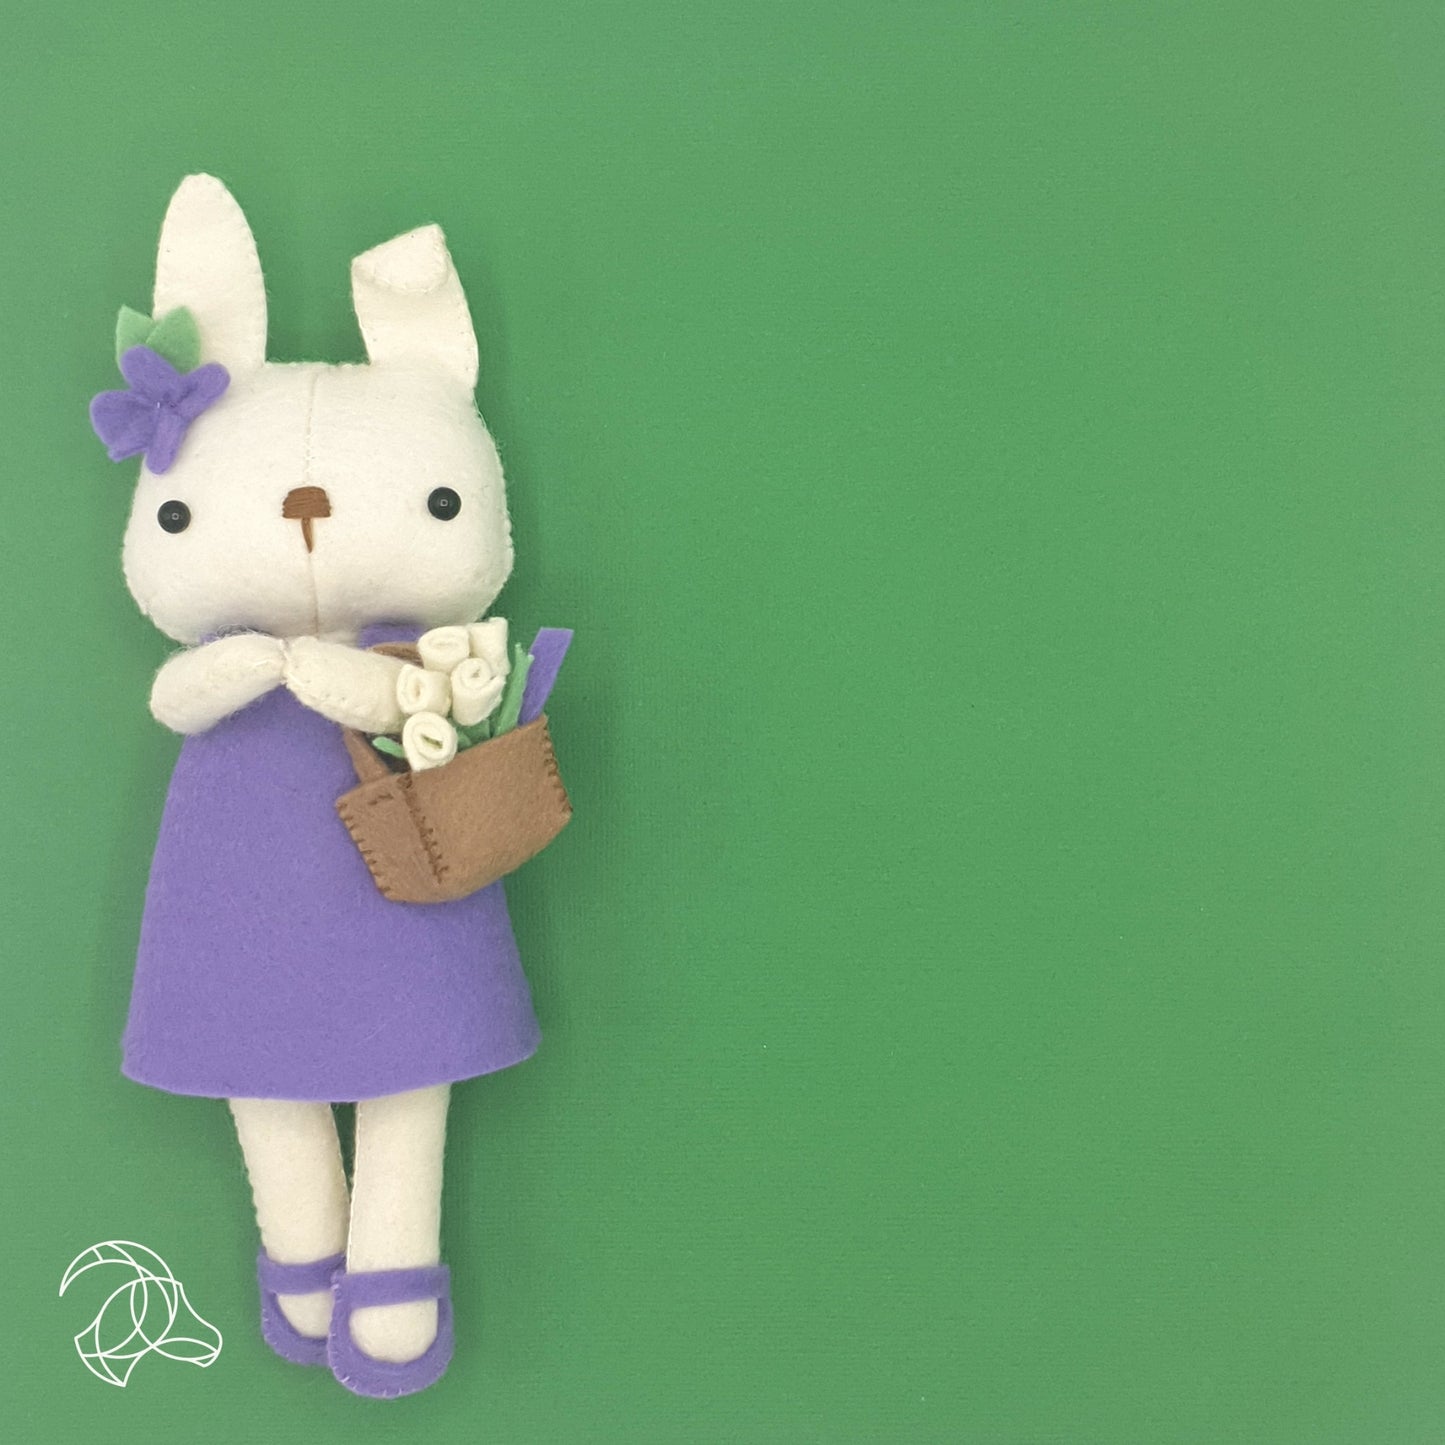 Sophie the Spring Bunny - Wool Felt Kit from Hardicraft